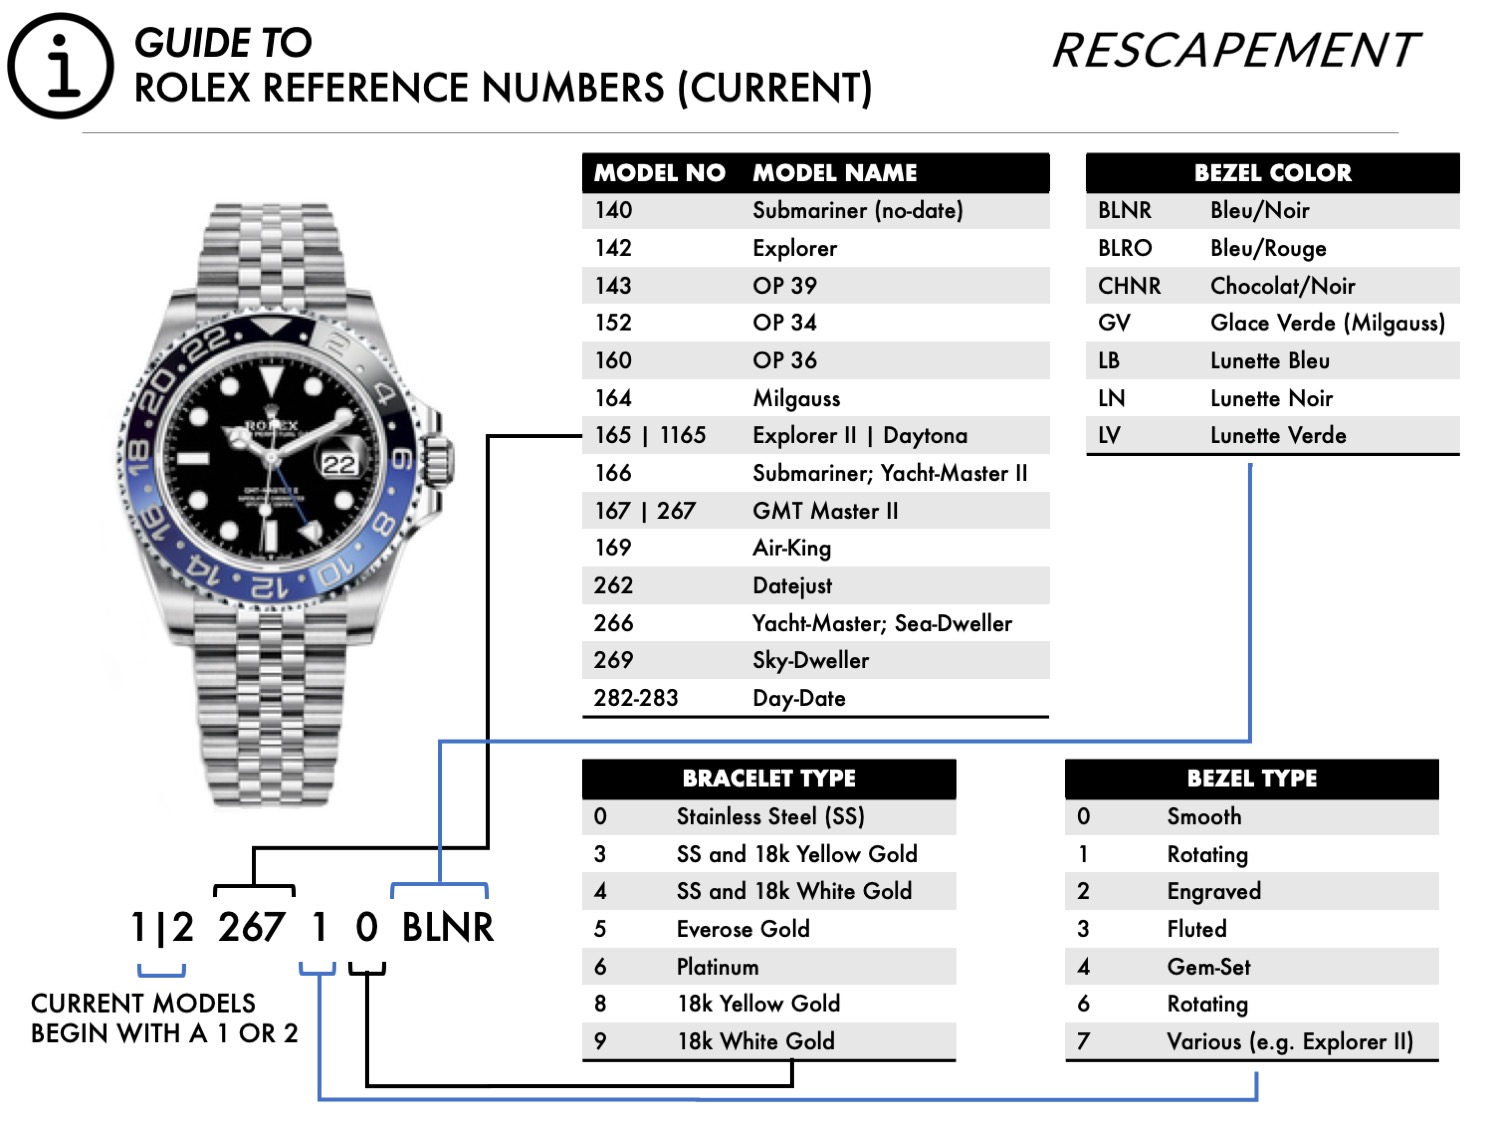 Rolex Reference Numbers: A Guide 